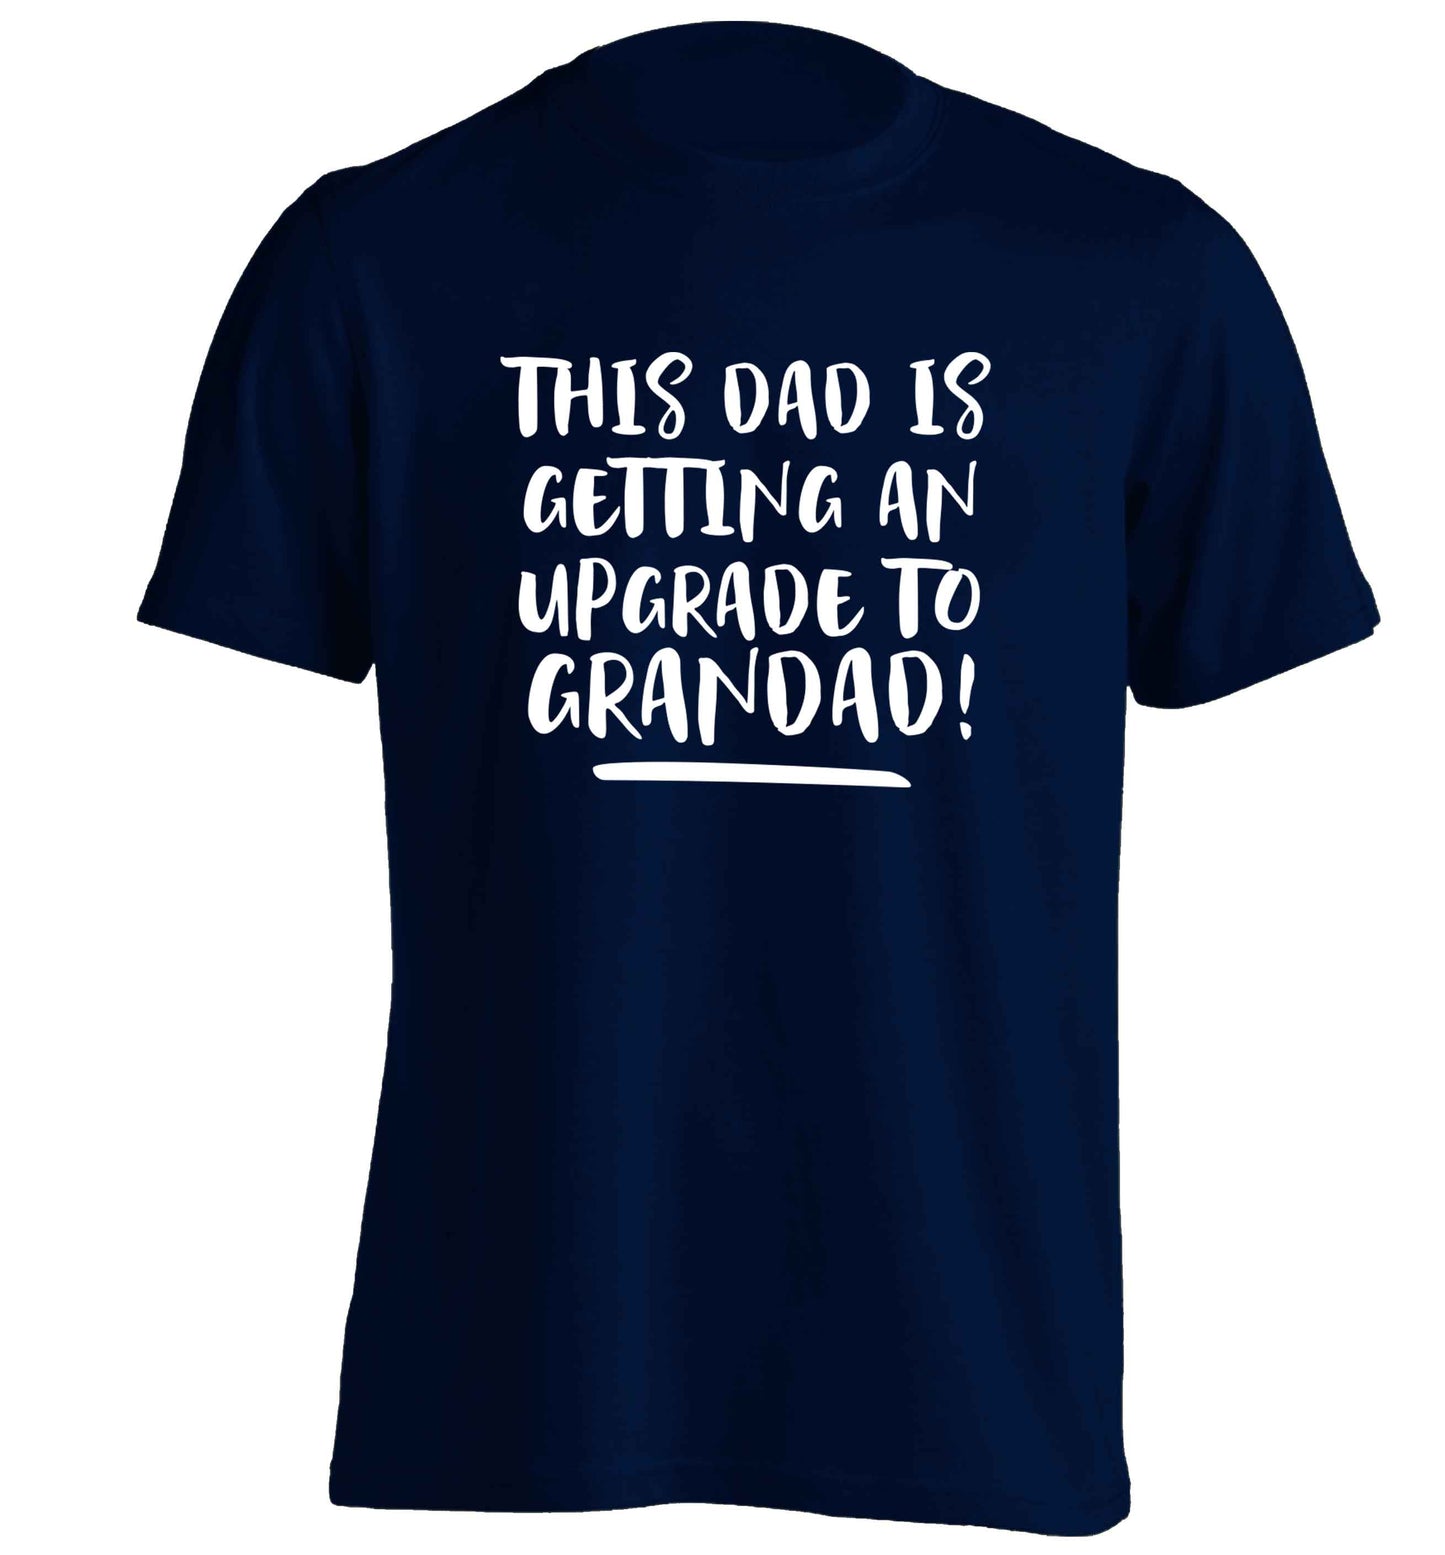 This dad is getting an upgrade to grandad! adults unisex navy Tshirt 2XL